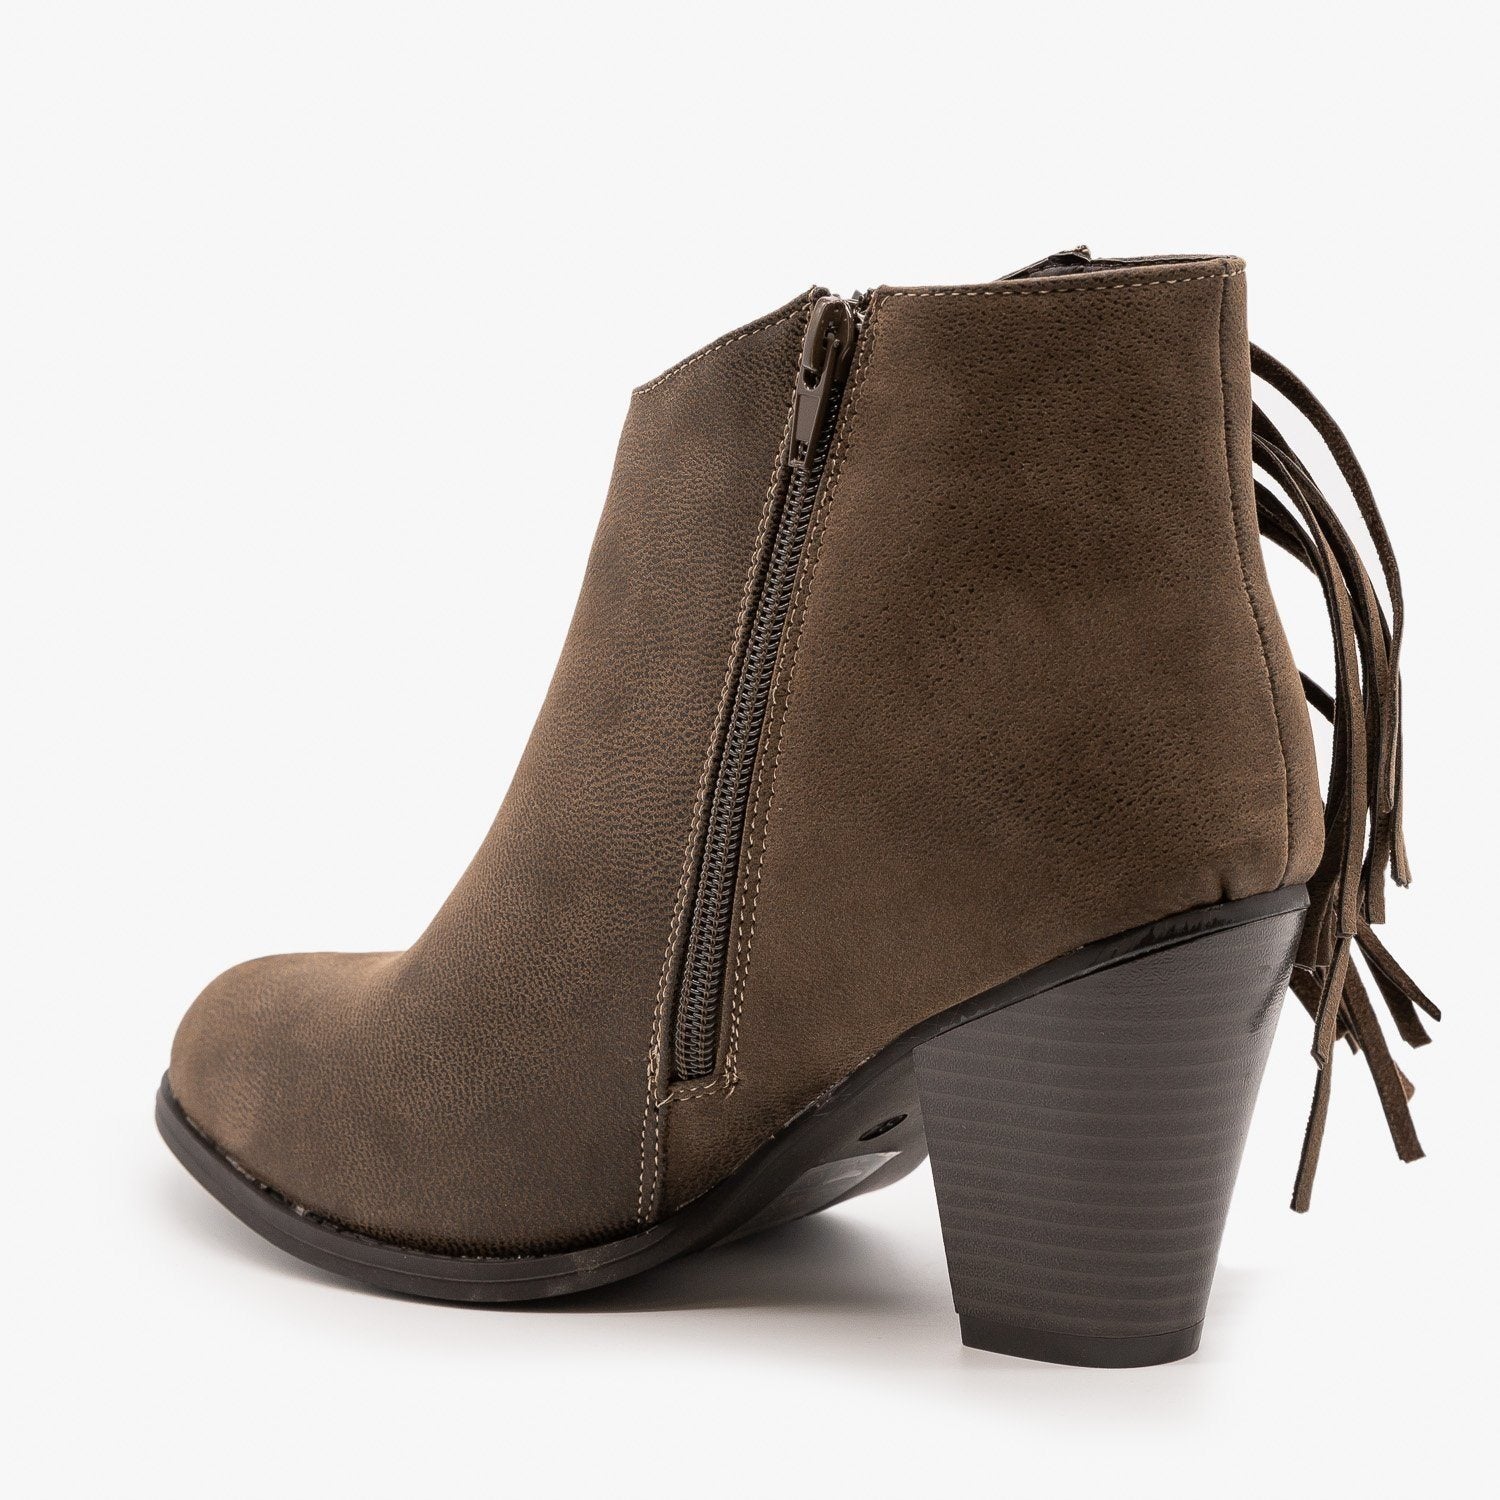 booties with fringe on side